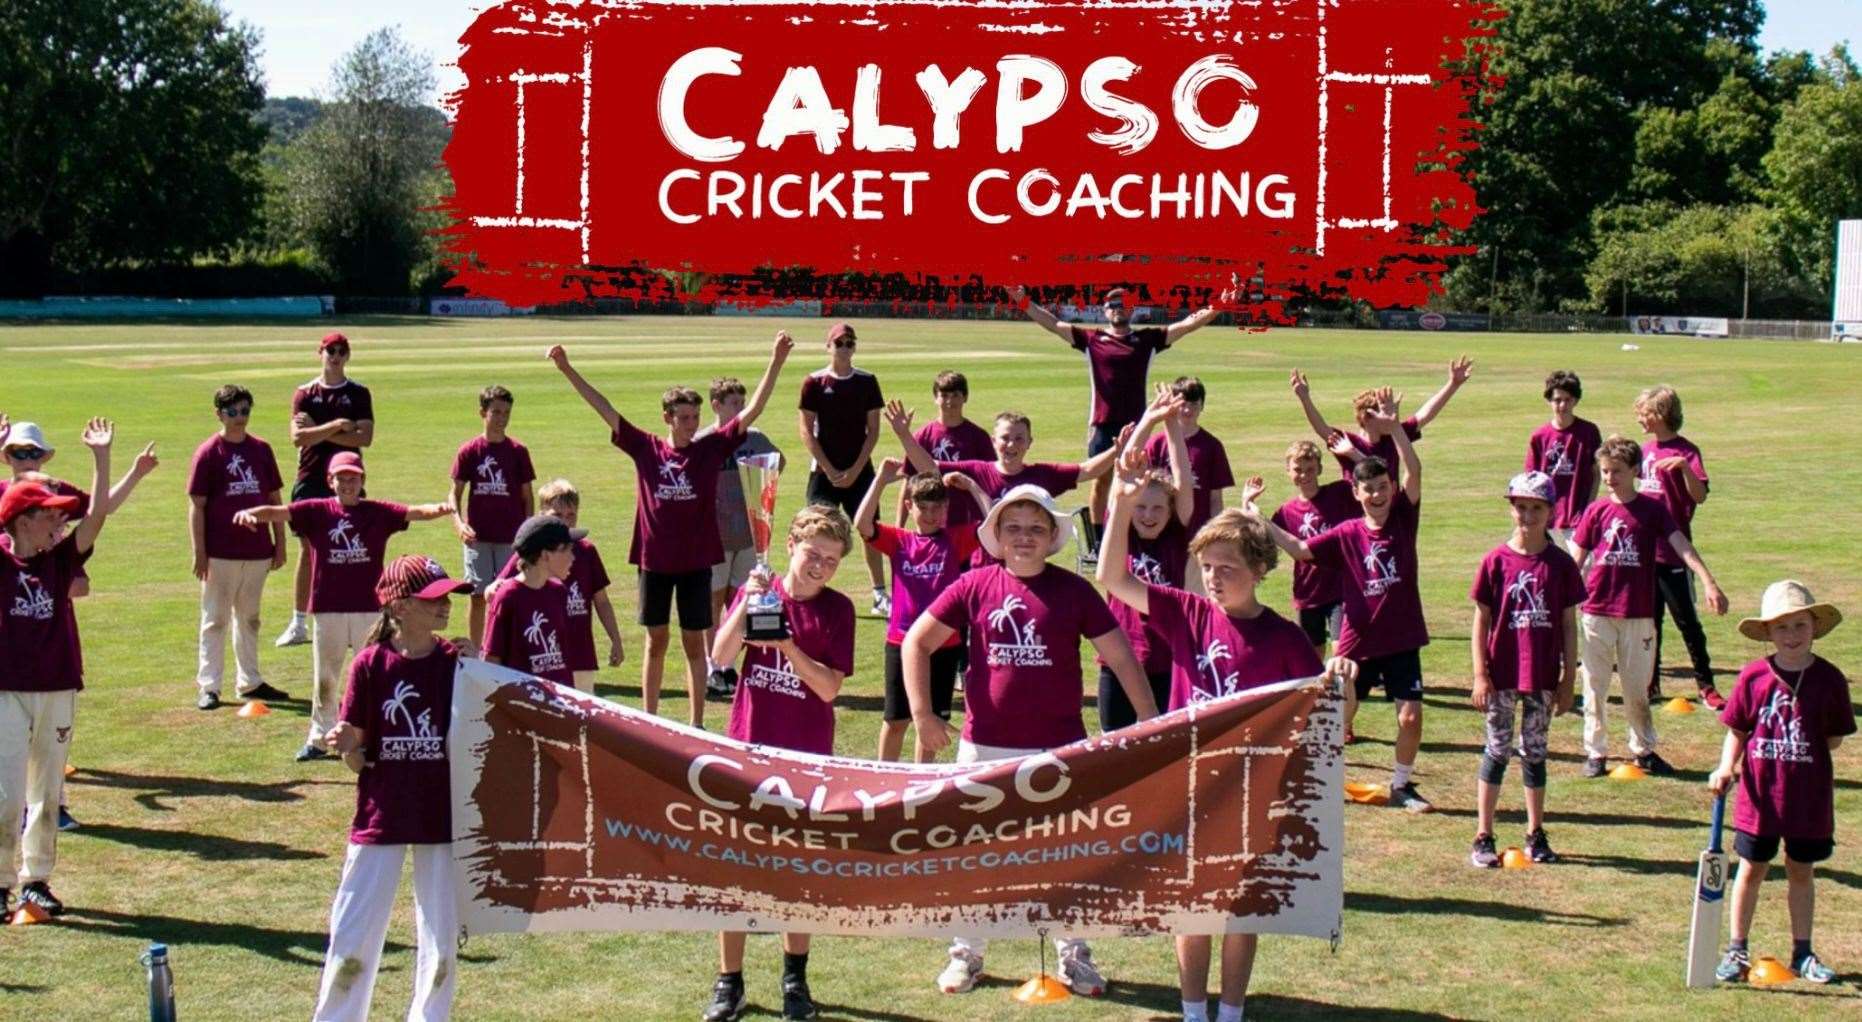 The calypso cricket programme, launched at Leeds & Broomfield in 2020, has gone from strength to strength